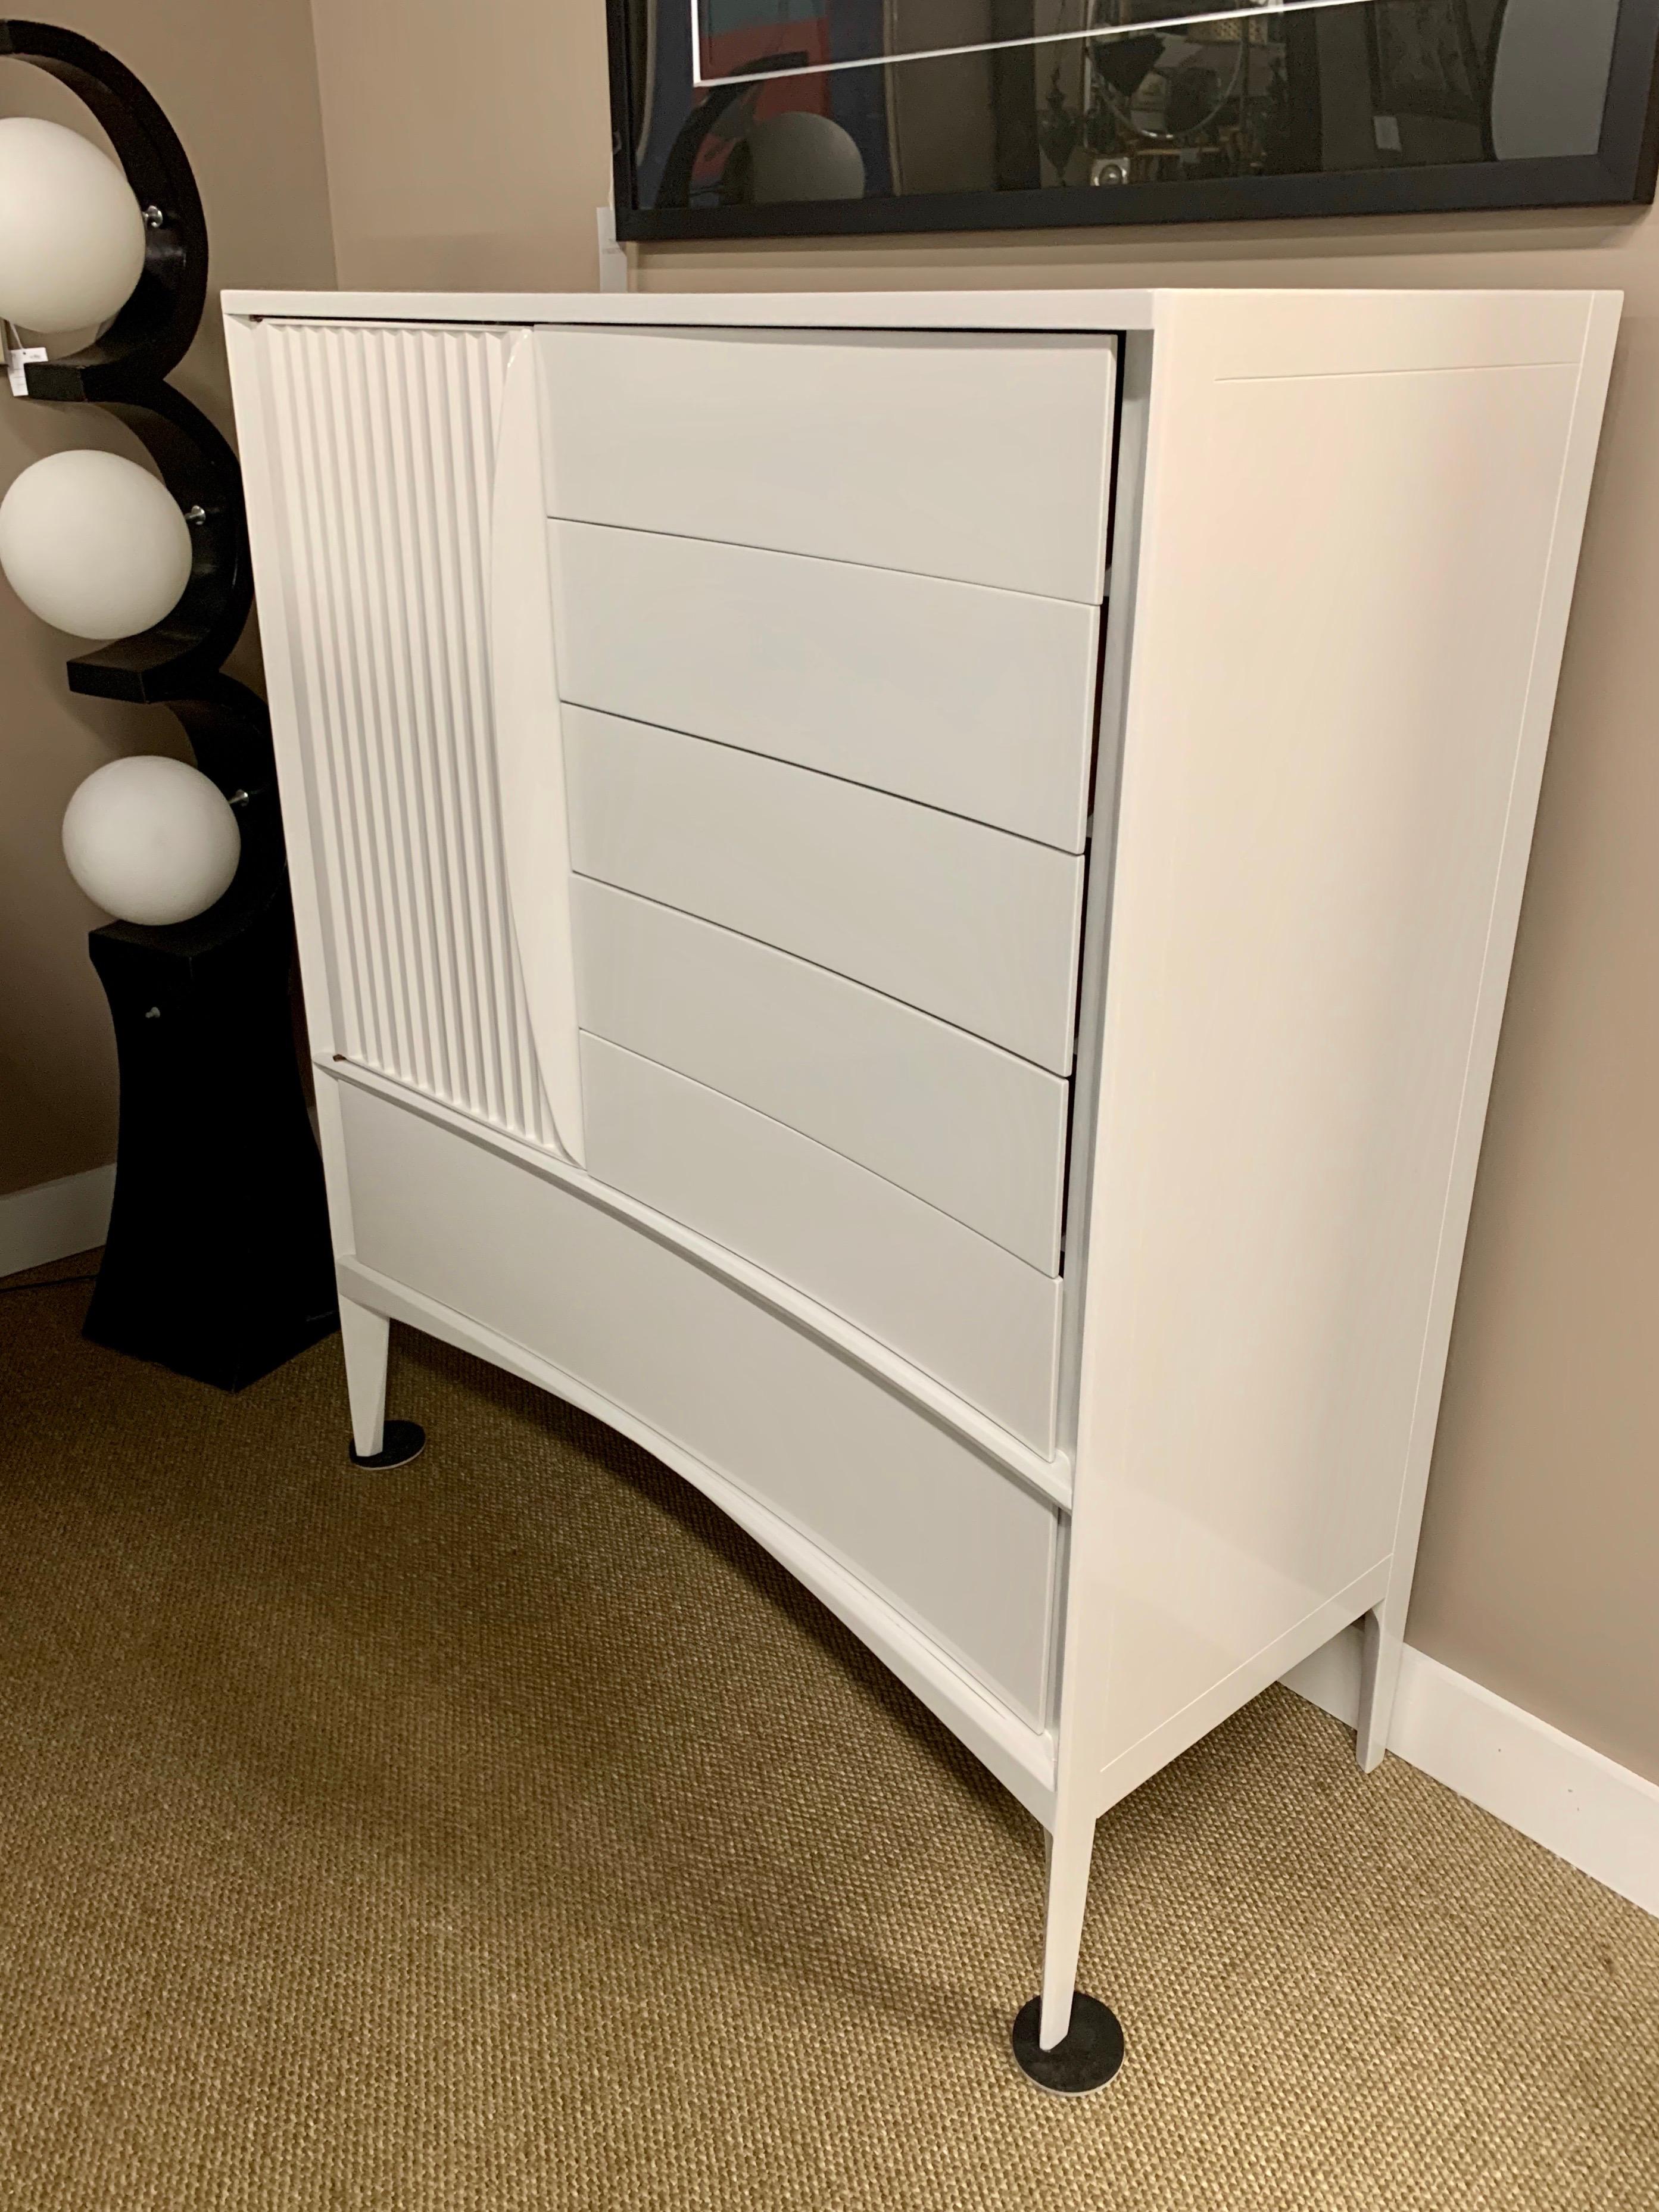 Newly lacquered in brilliant white, this piece is a stunner. Multiple storage options and tambour door at left. Excellent condition.
Now, more than ever, home is where the heart is.